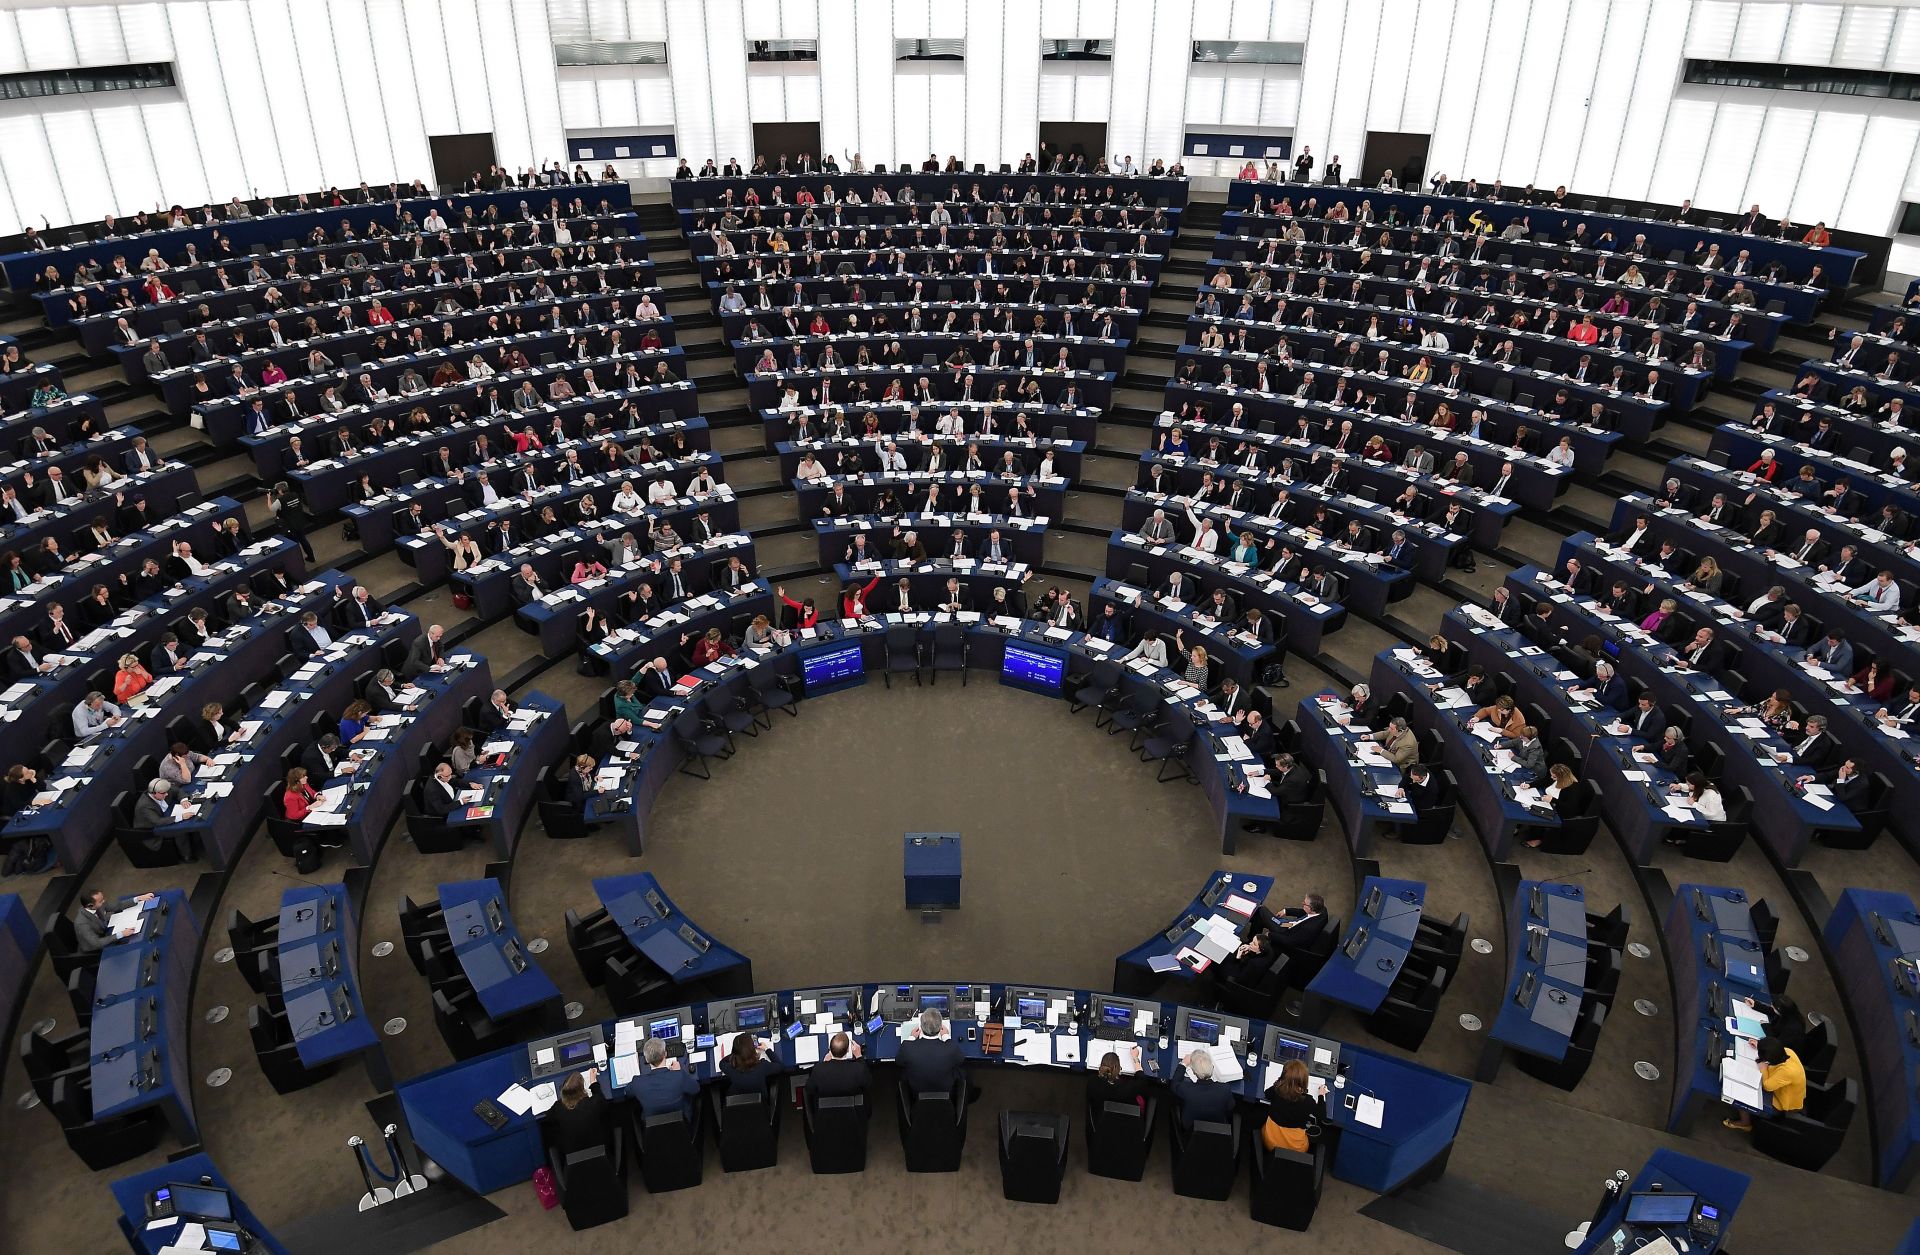 Members of the European Parliament vote during a plenary session on Nov. 14, 2018, in Strasbourg, France.